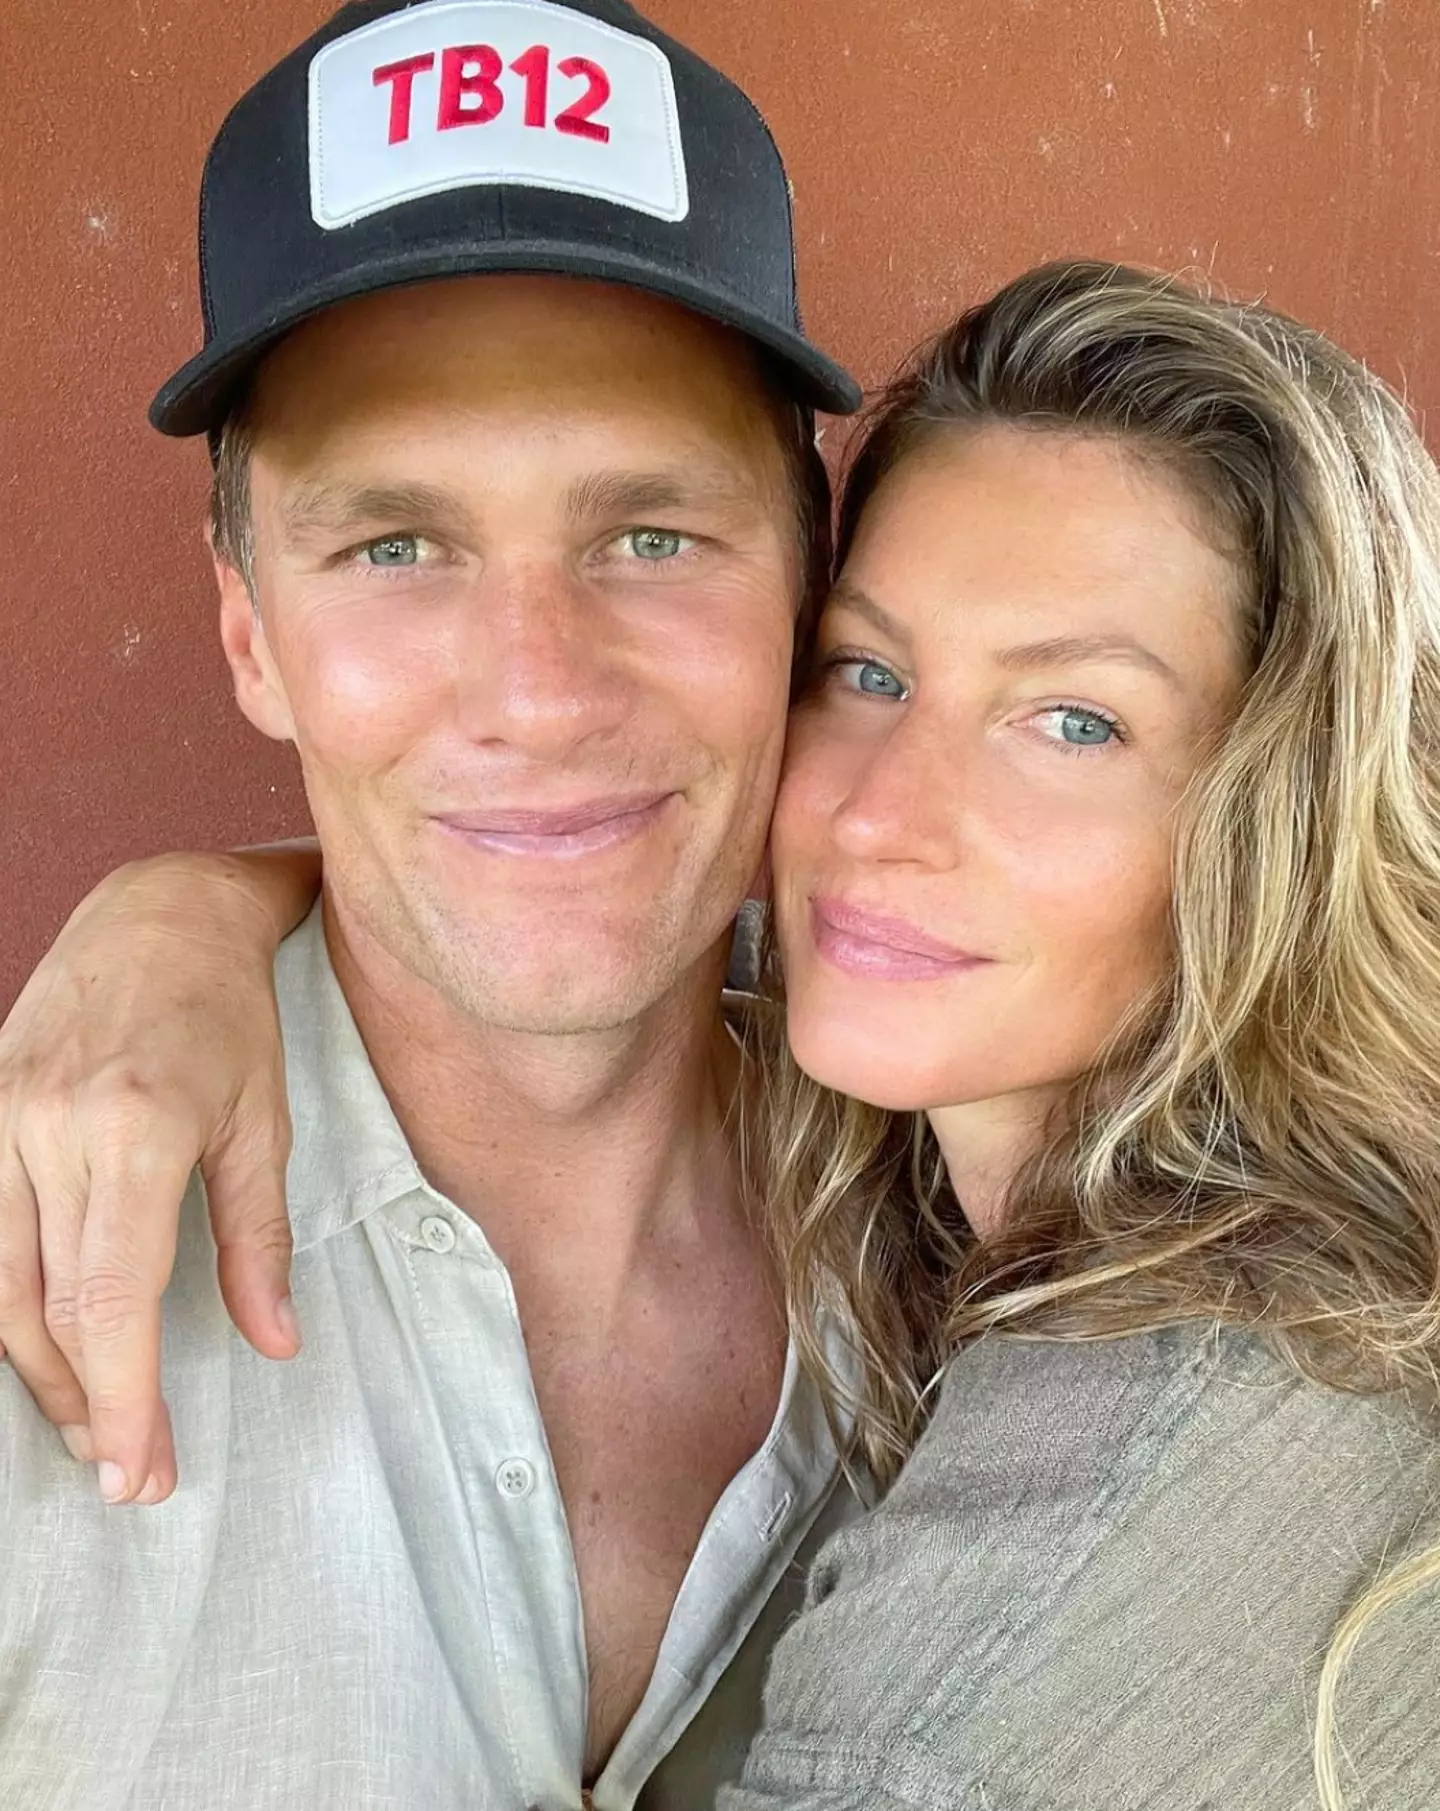 Gisele and Tom divorced in October 2022.